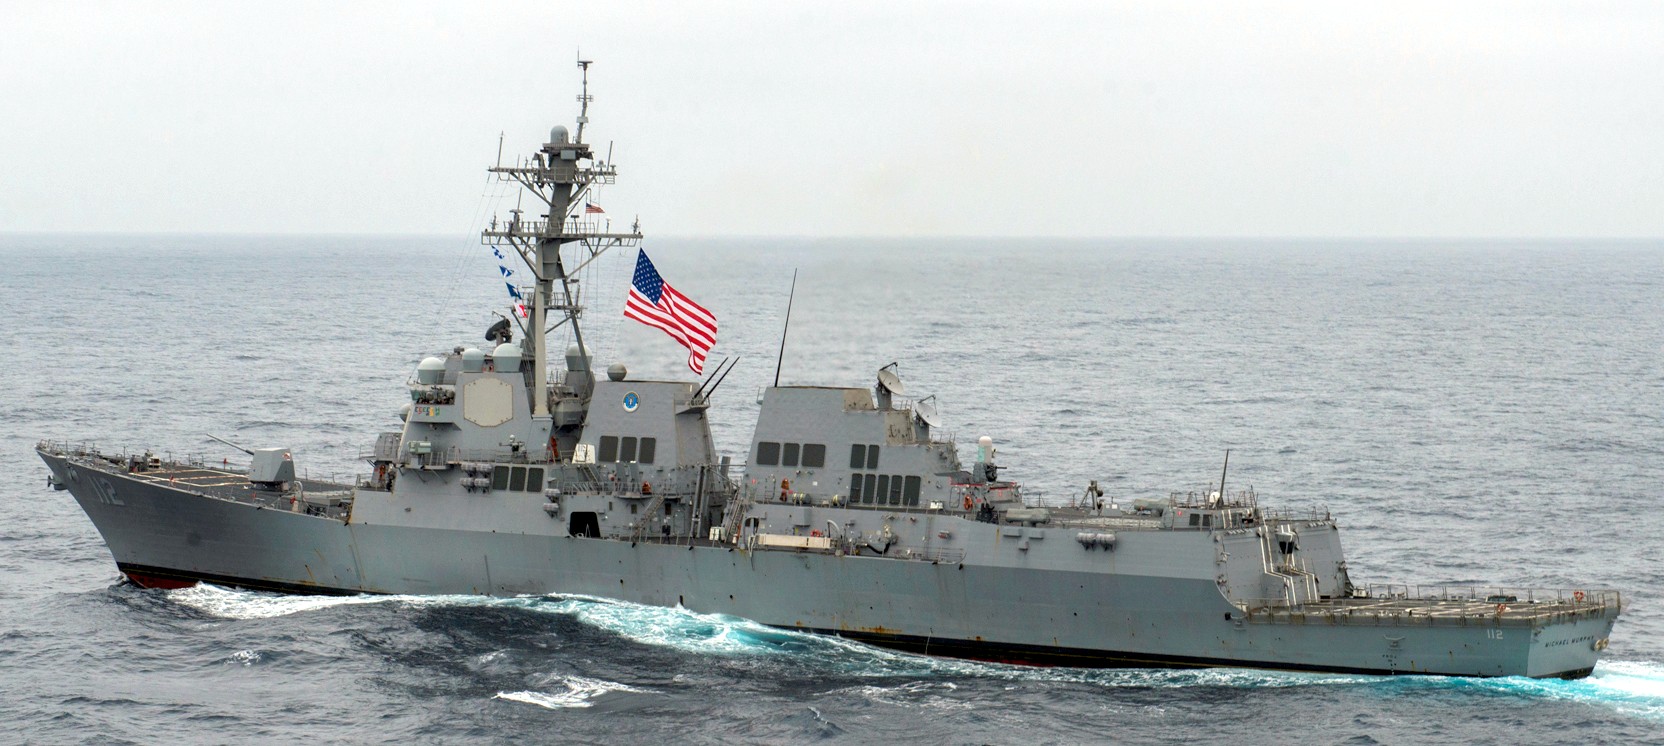 ddg-112 uss michael murphy arleigh burke class guided missile destroyer aegis us navy 32p